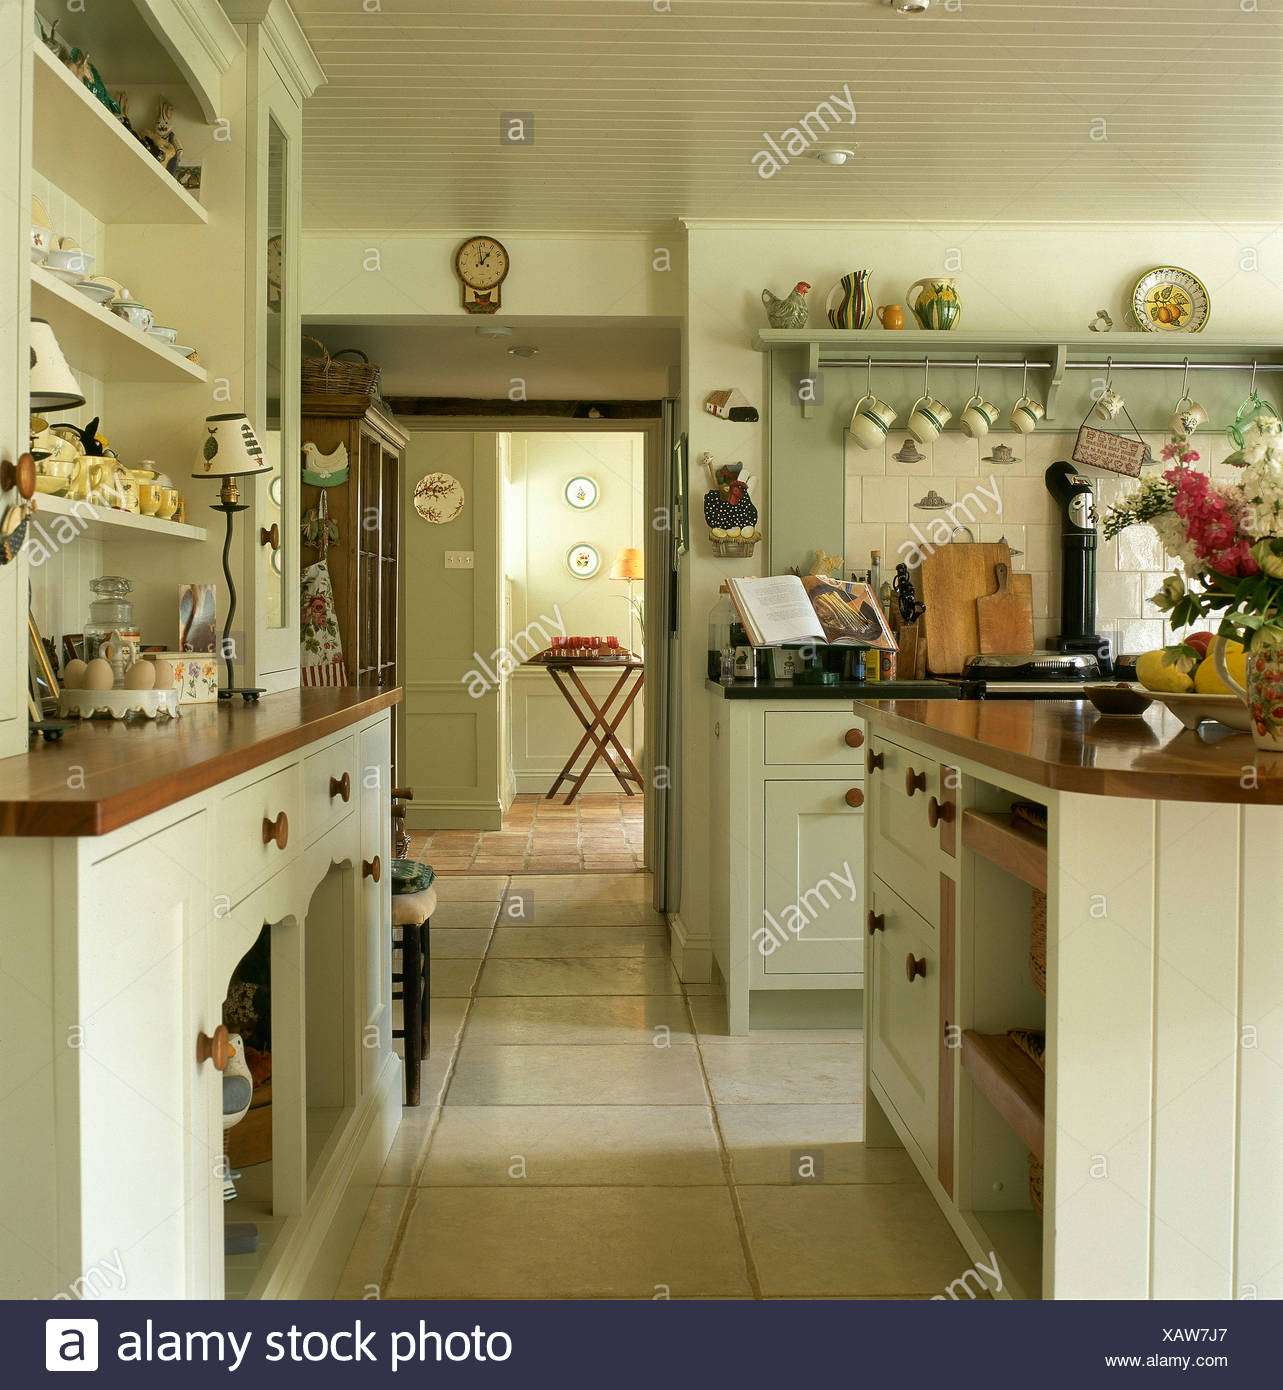 Fitted Dresser And Pale Cream Fitted Units In Country Kitchen With